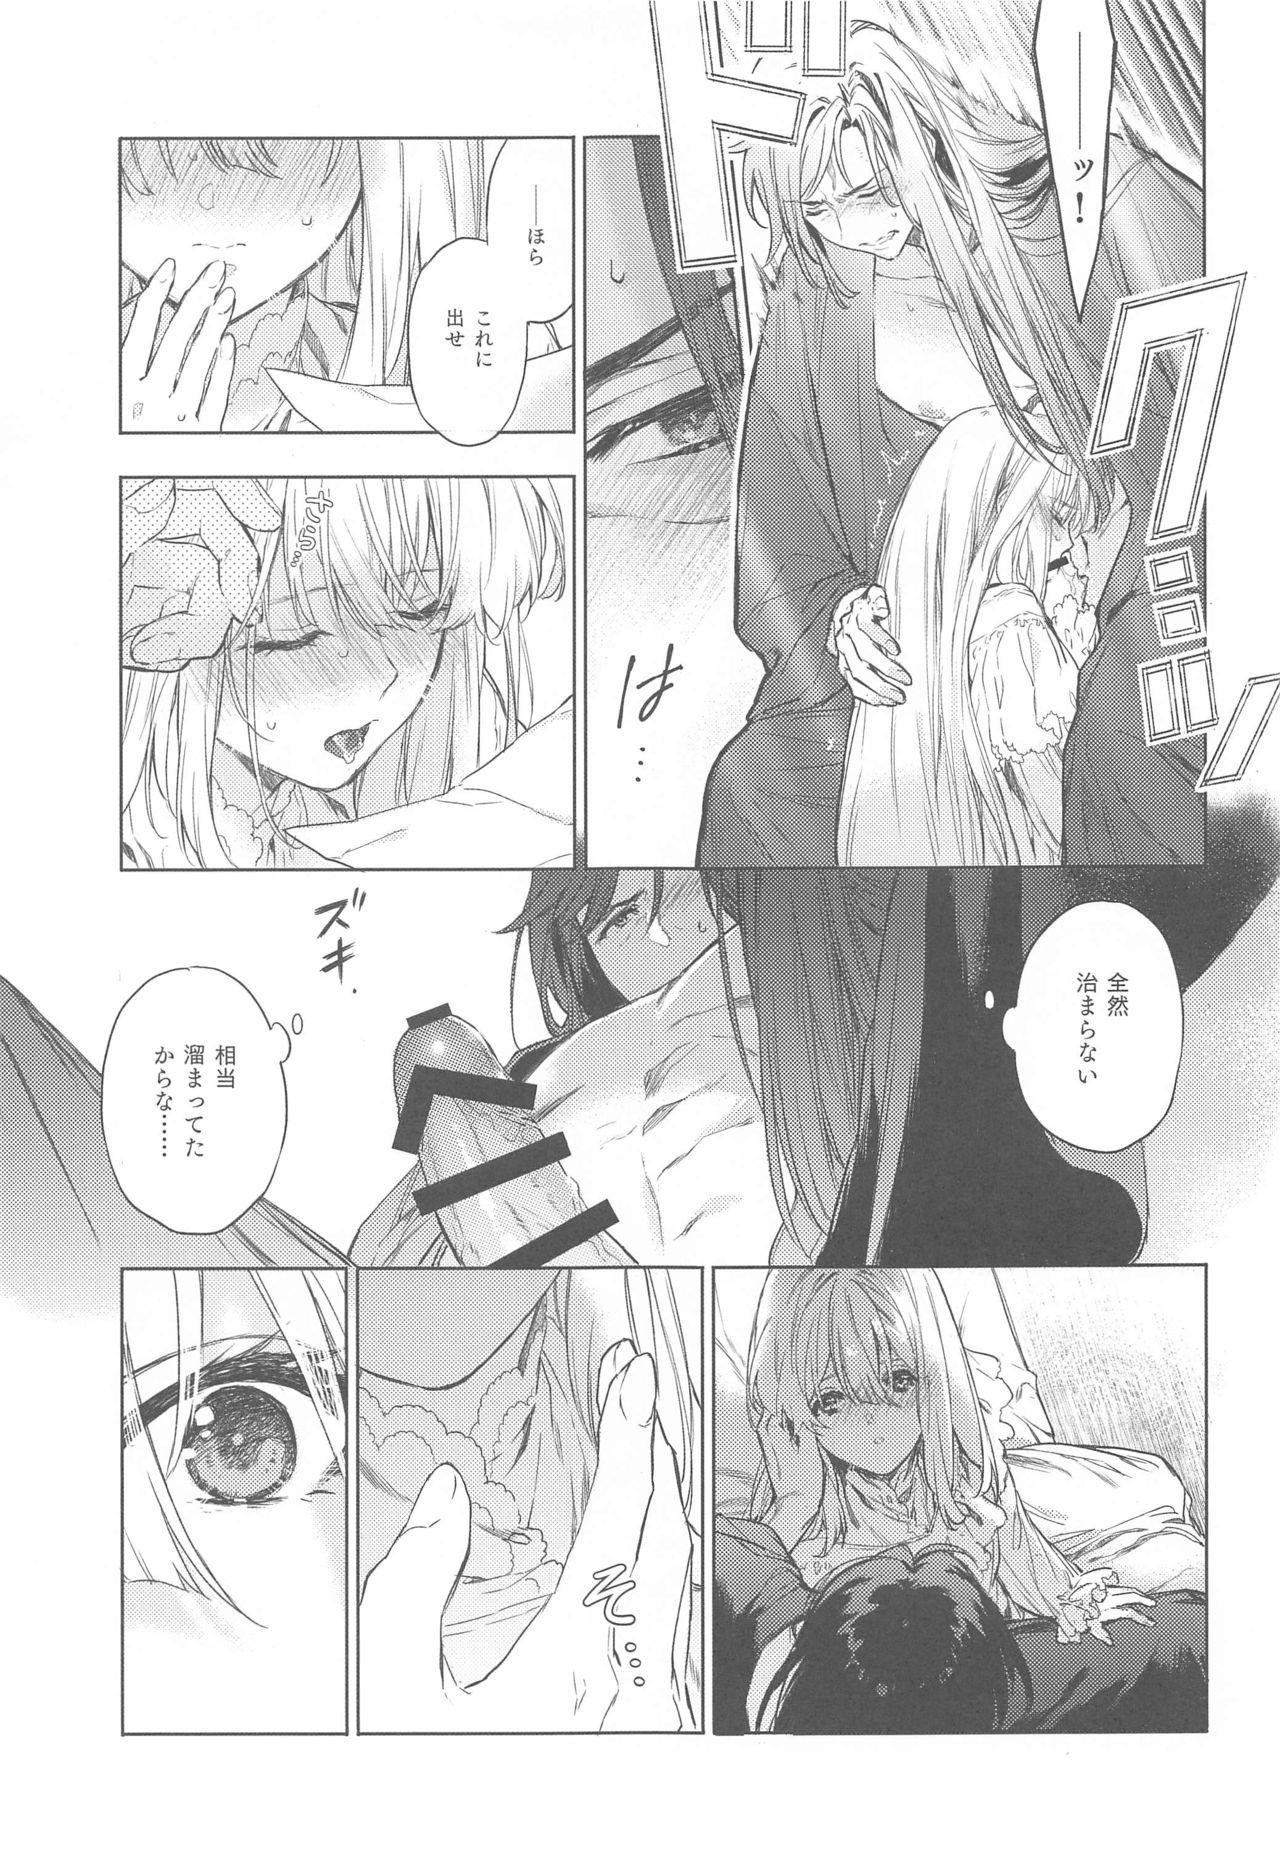 Family Roleplay Scars of love - Violet evergarden Pene - Page 8